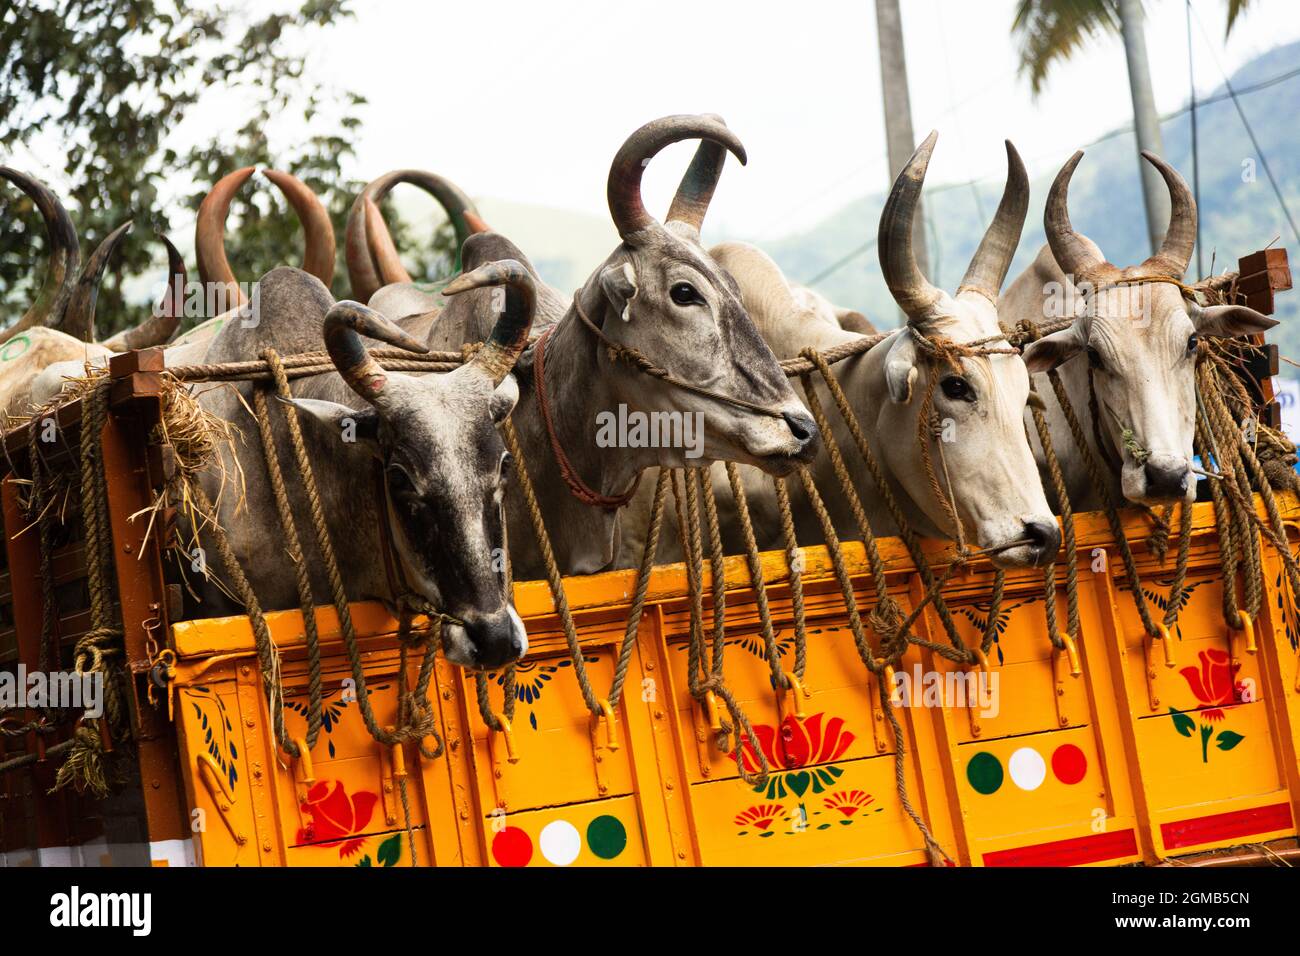 Many cattle stand closely on a brightly painted flatbed truck in India, tethered and being transported to a livestock market. Stock Photo